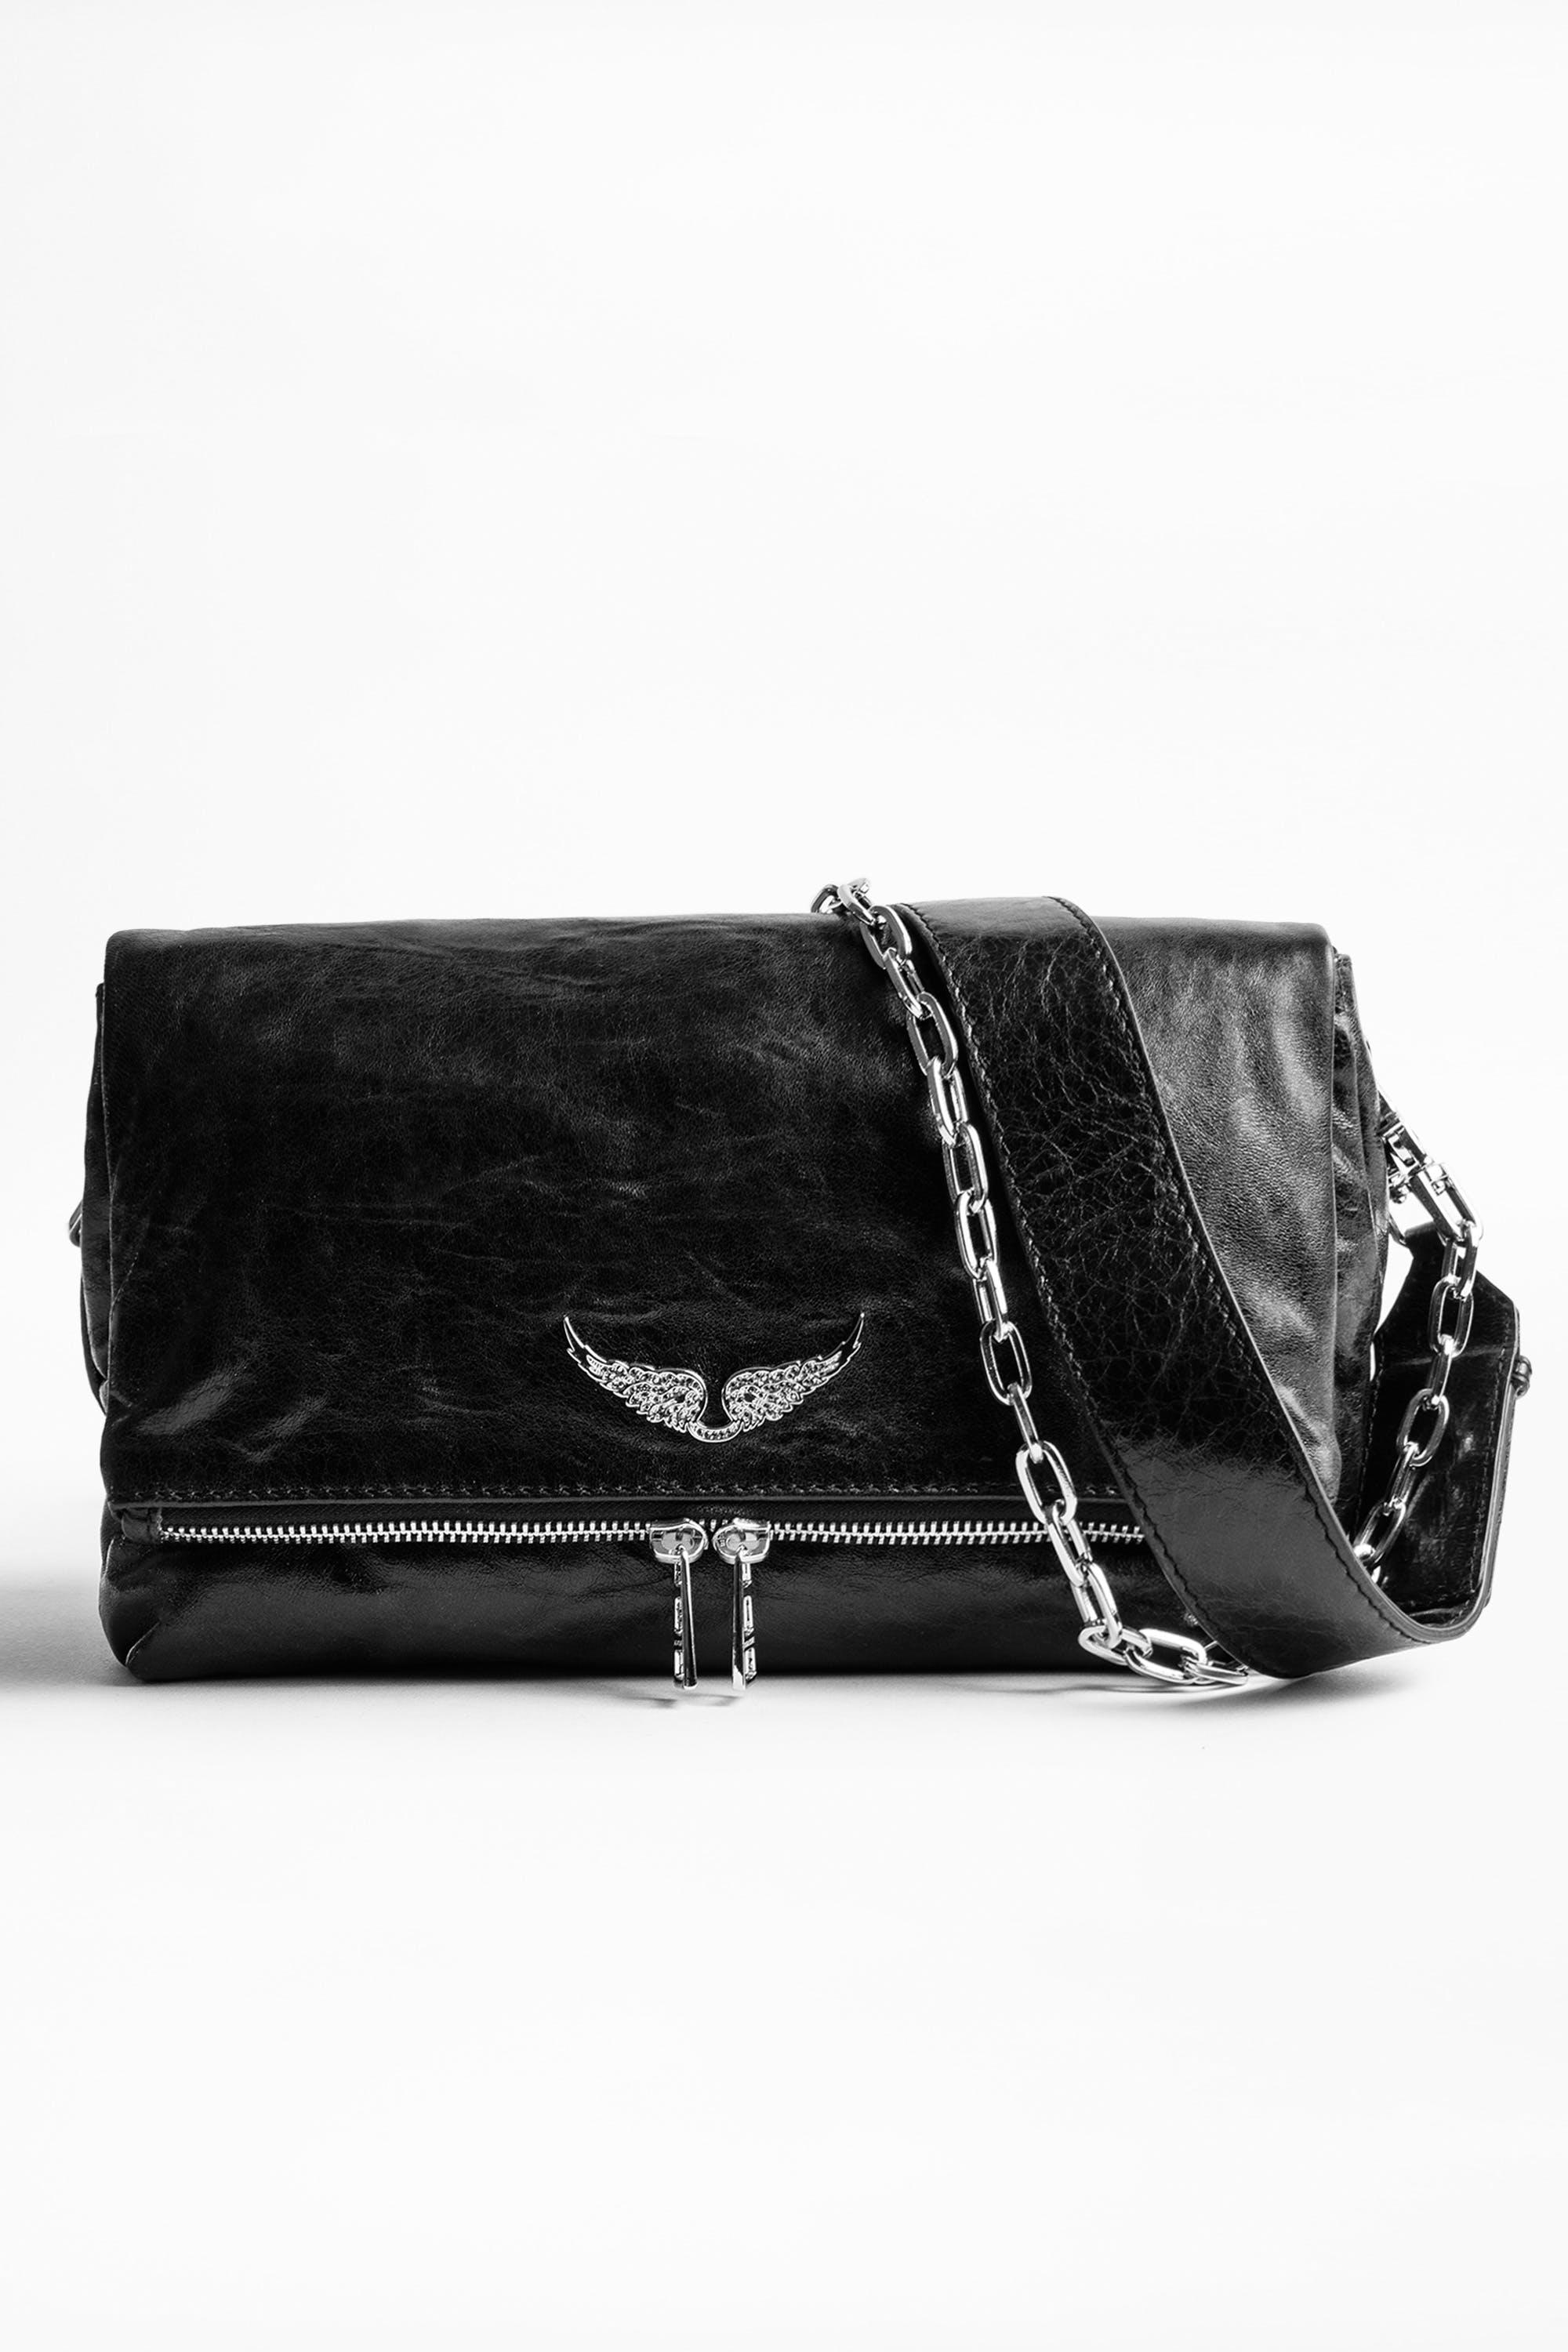 Zadig & Voltaire Leather Rocky Crush Bag in Black - Lyst